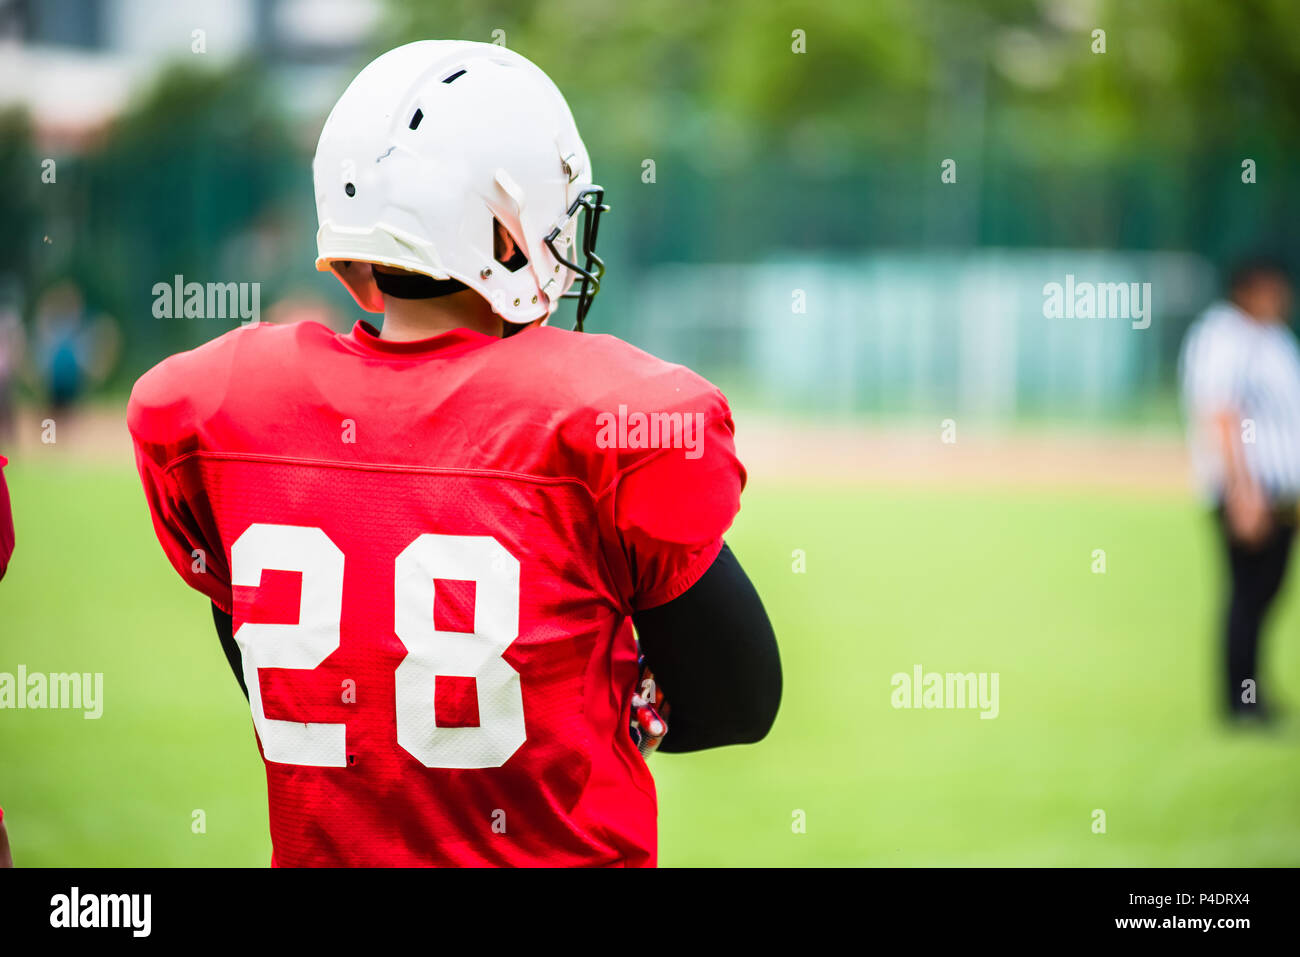 Saturated image of an American Football player in action Stock Photo